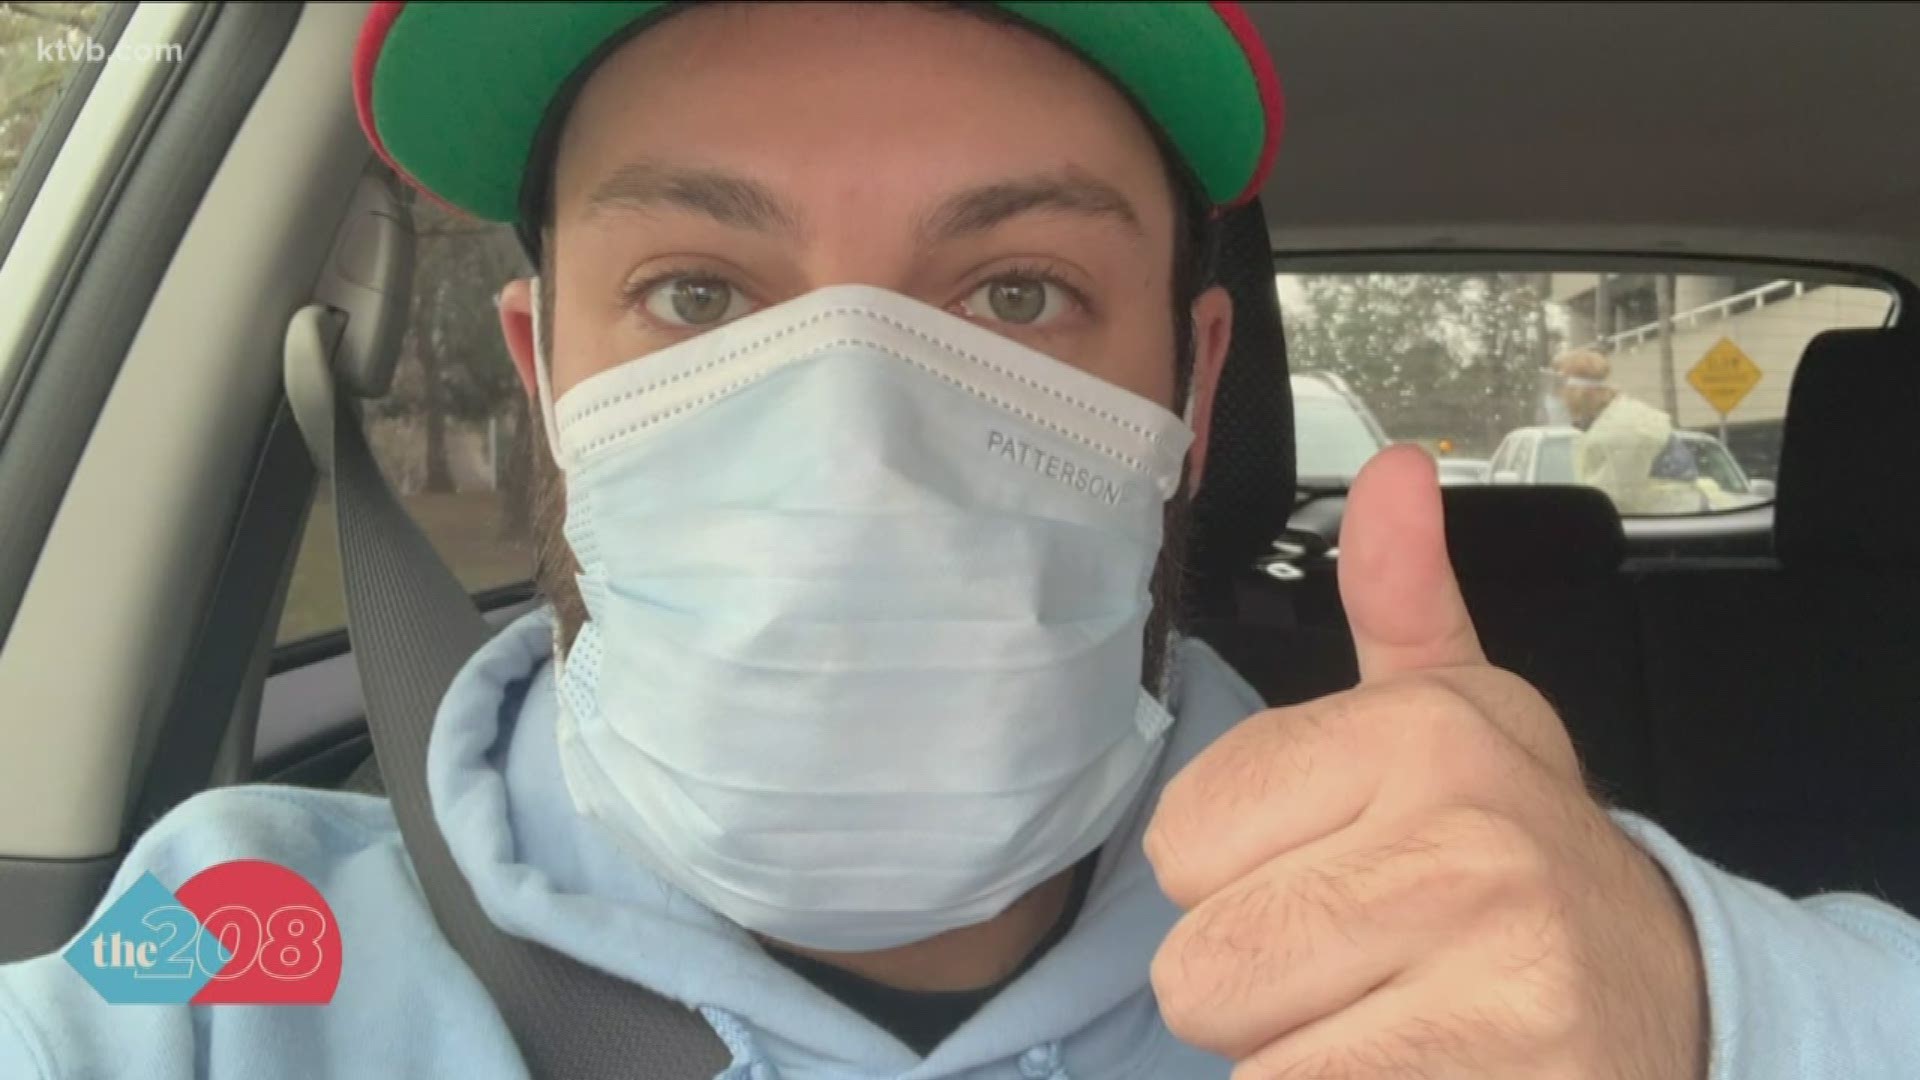 KTVB reporter Joe Parris is at home recovering from coronavirus.